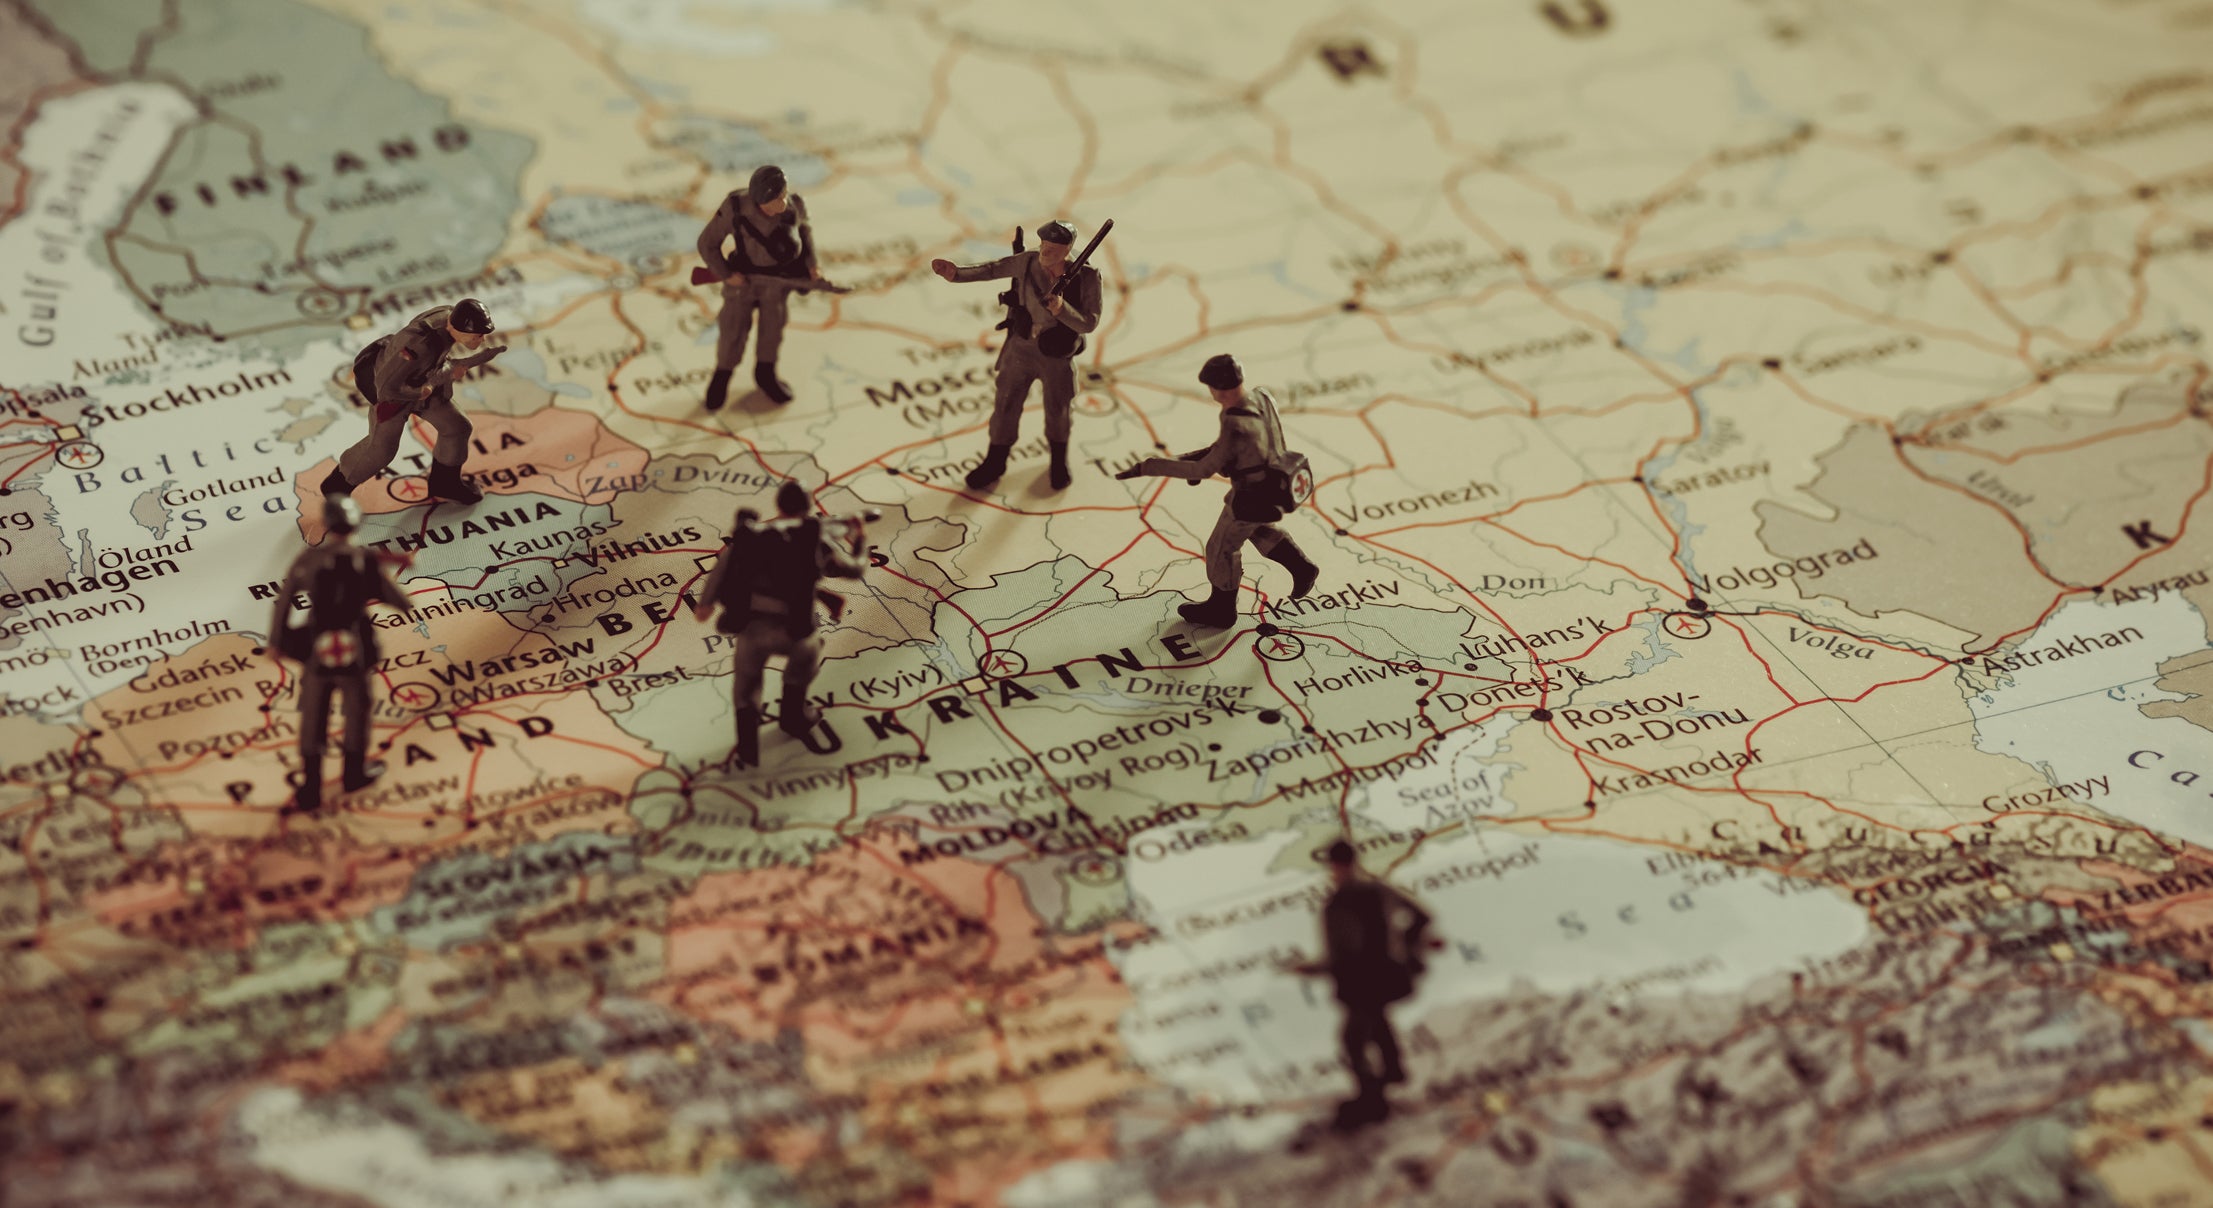 painted model soldiers standing on a map of eastern Europe